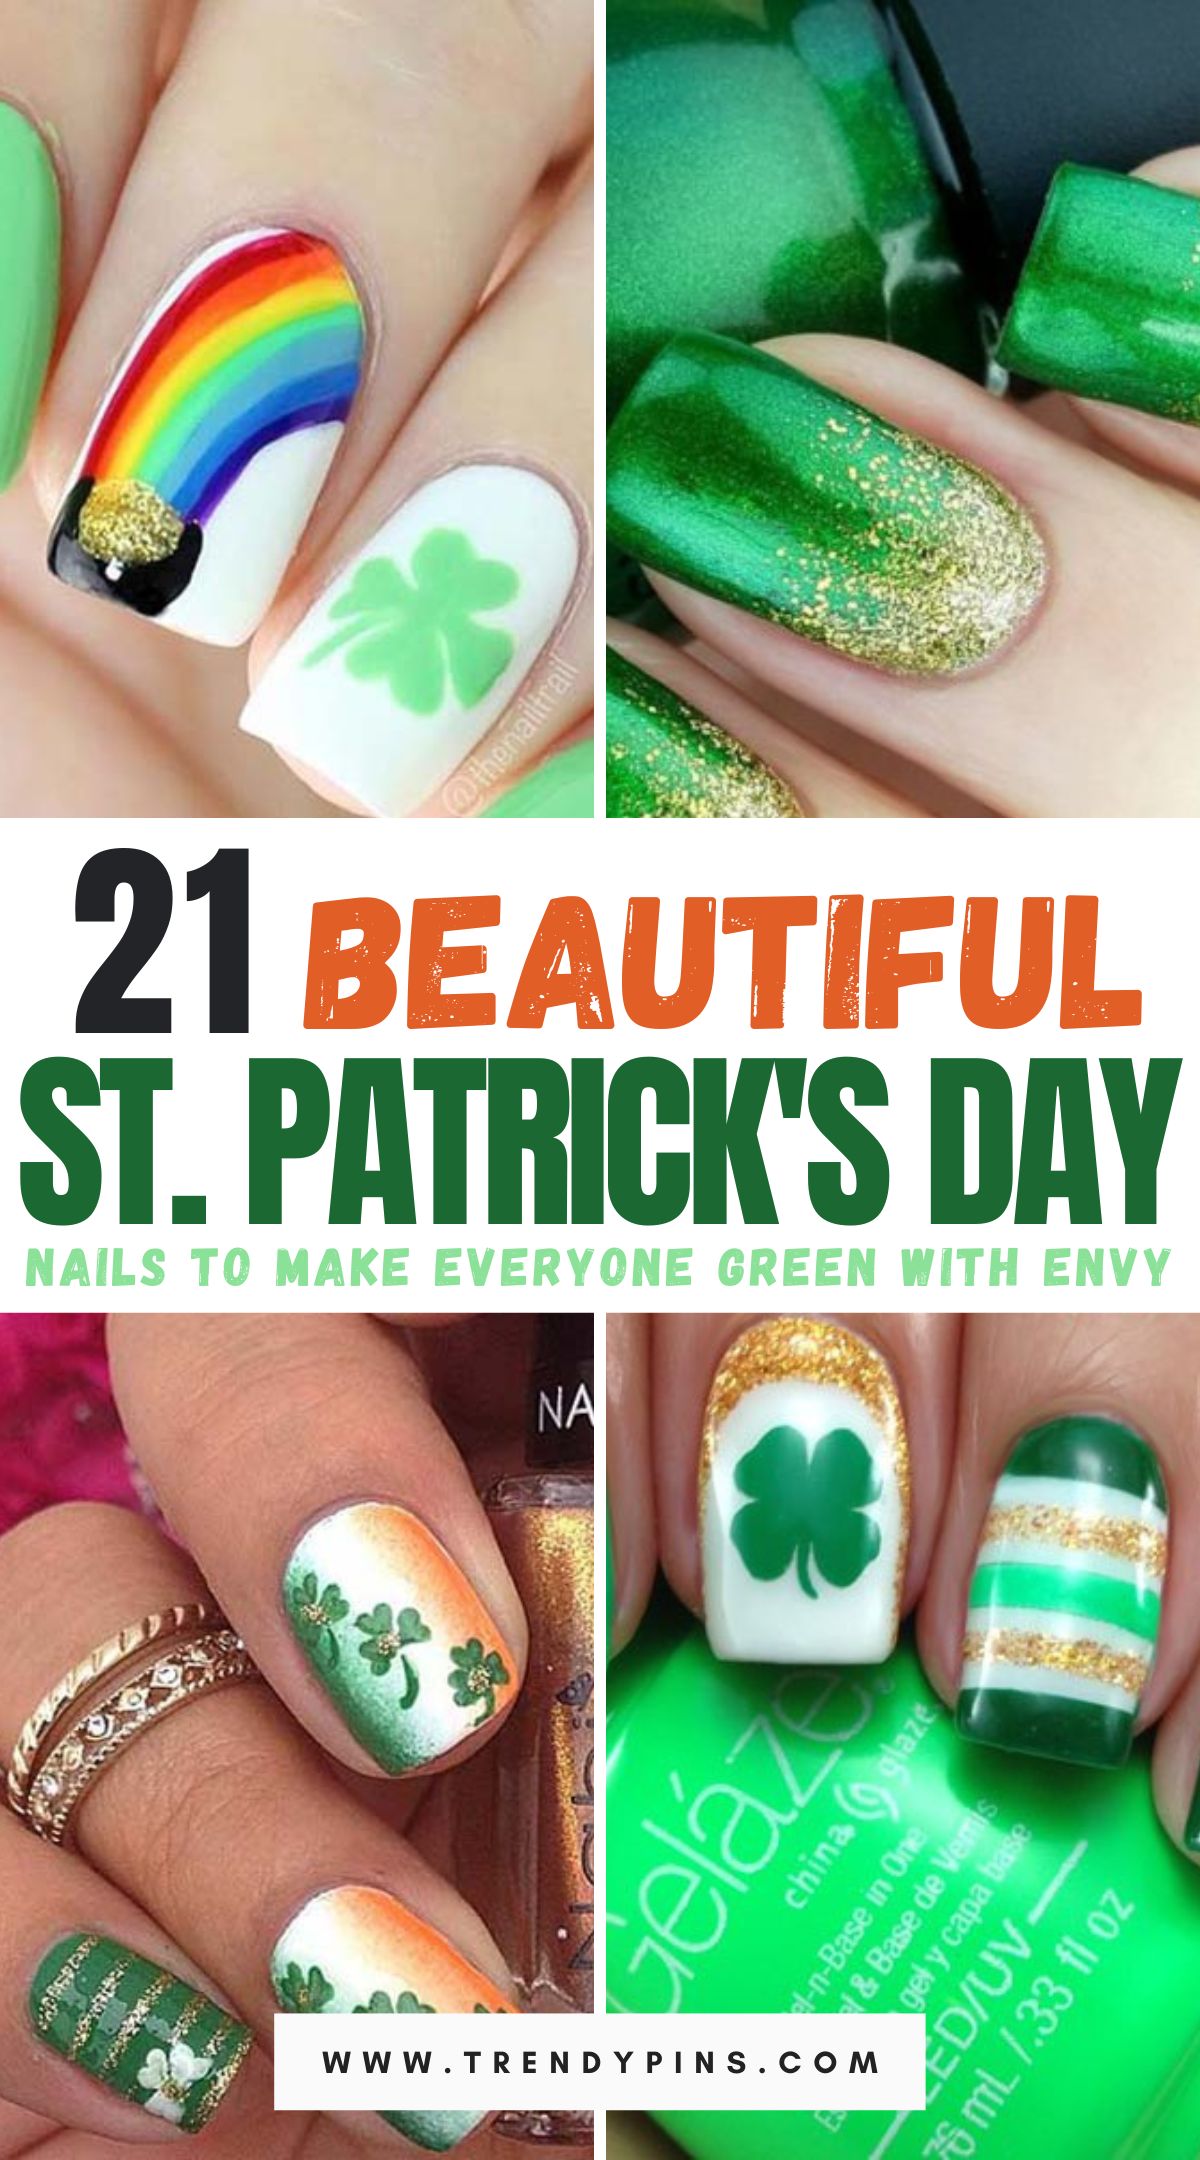 Make everyone green with envy with these 21 St. Patrick's Day nail designs. From shamrock-inspired patterns to glittering gold accents, discover charming nail art ideas that capture the spirit of the holiday and add a festive touch to your look.